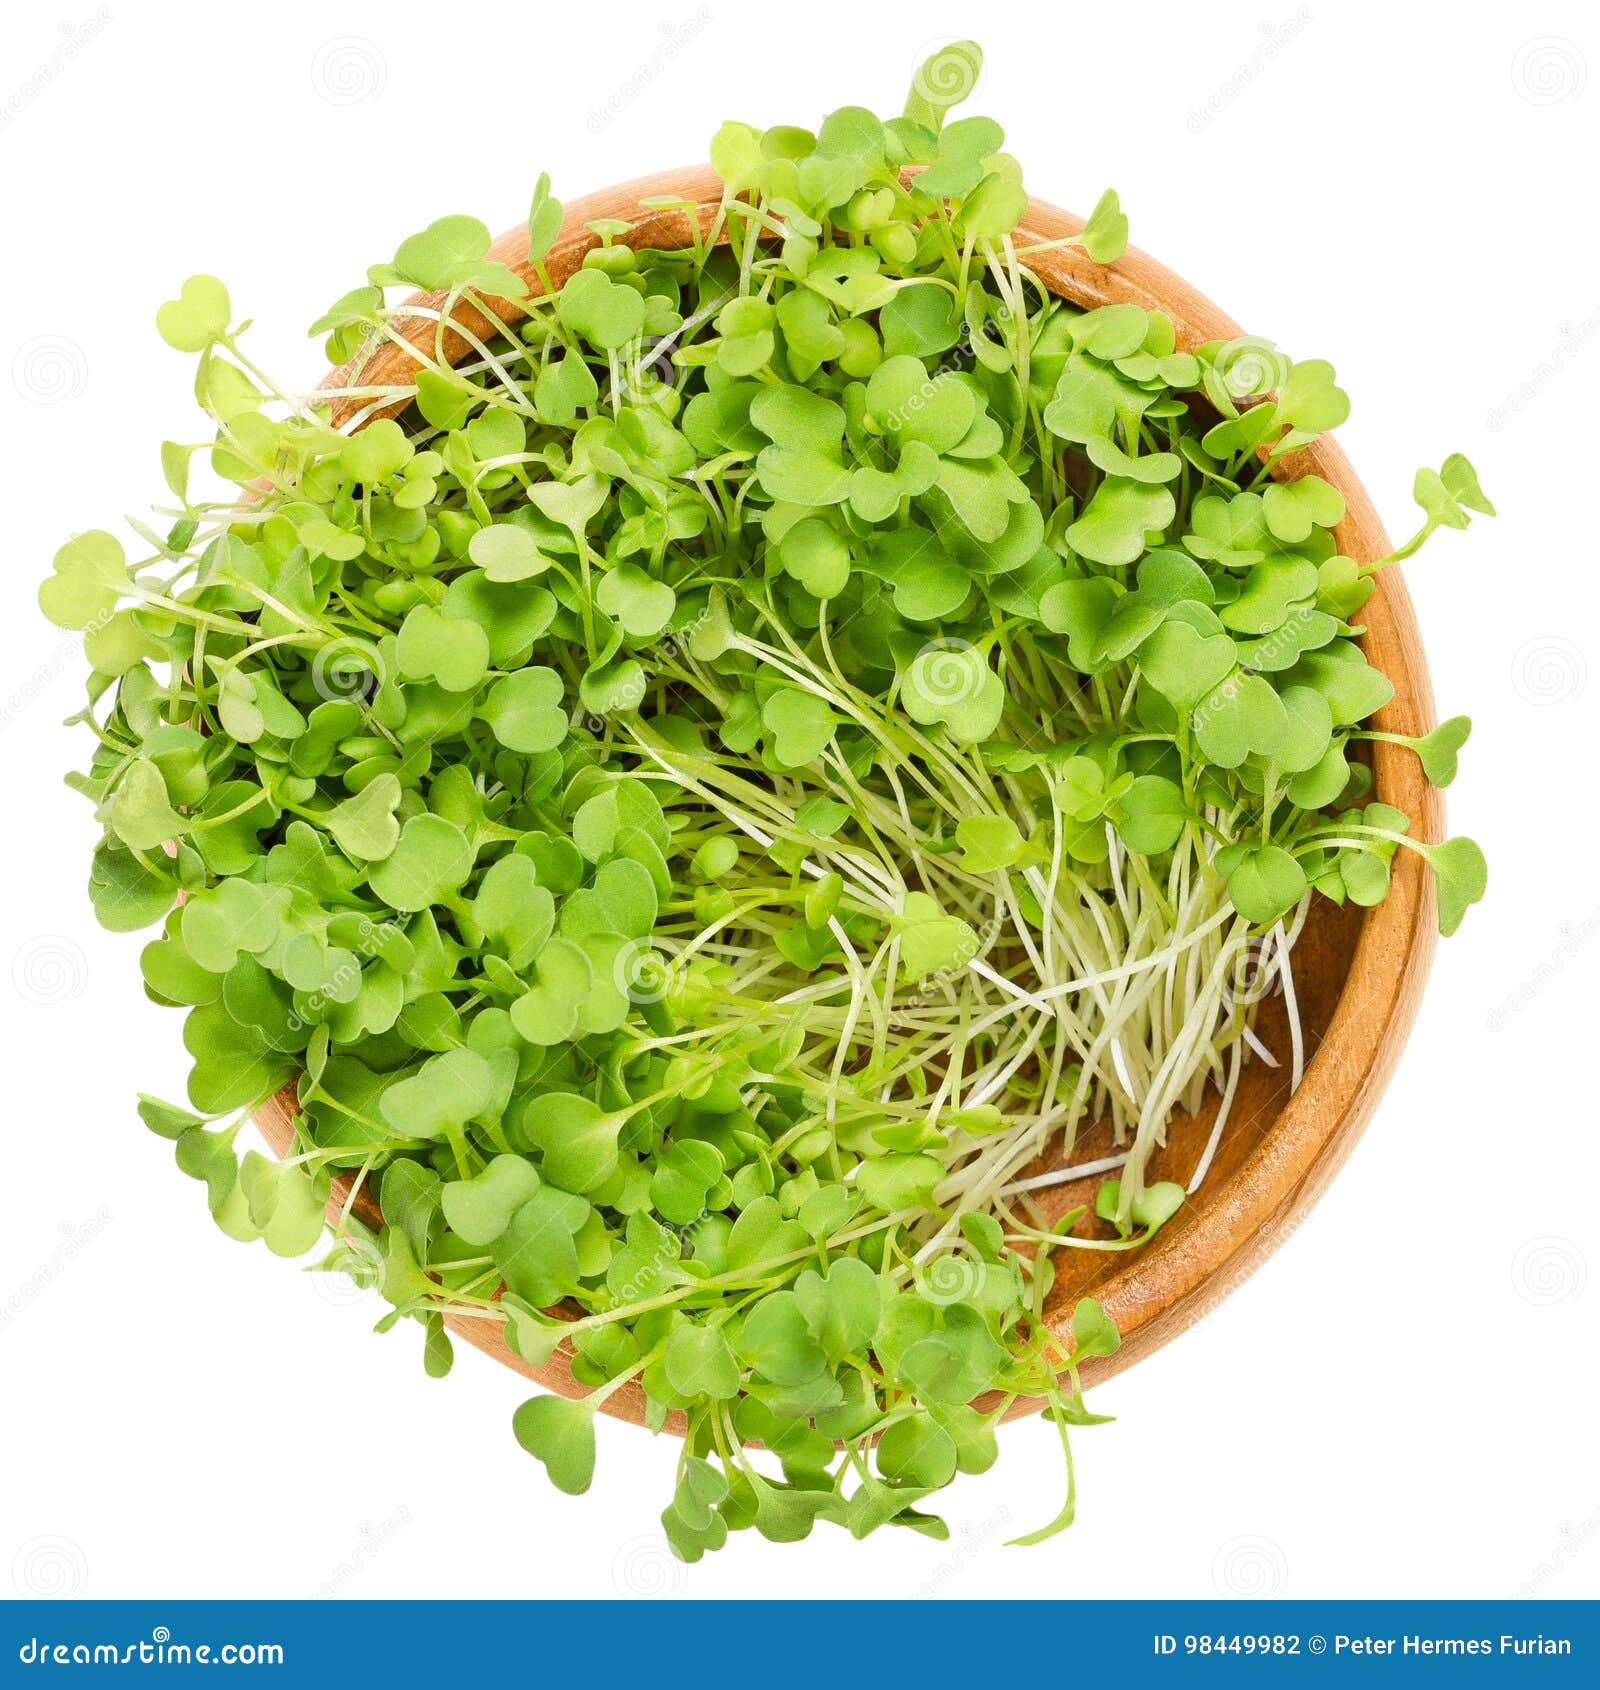 rocket salad sprouts, arugula, in wooden bowl over white